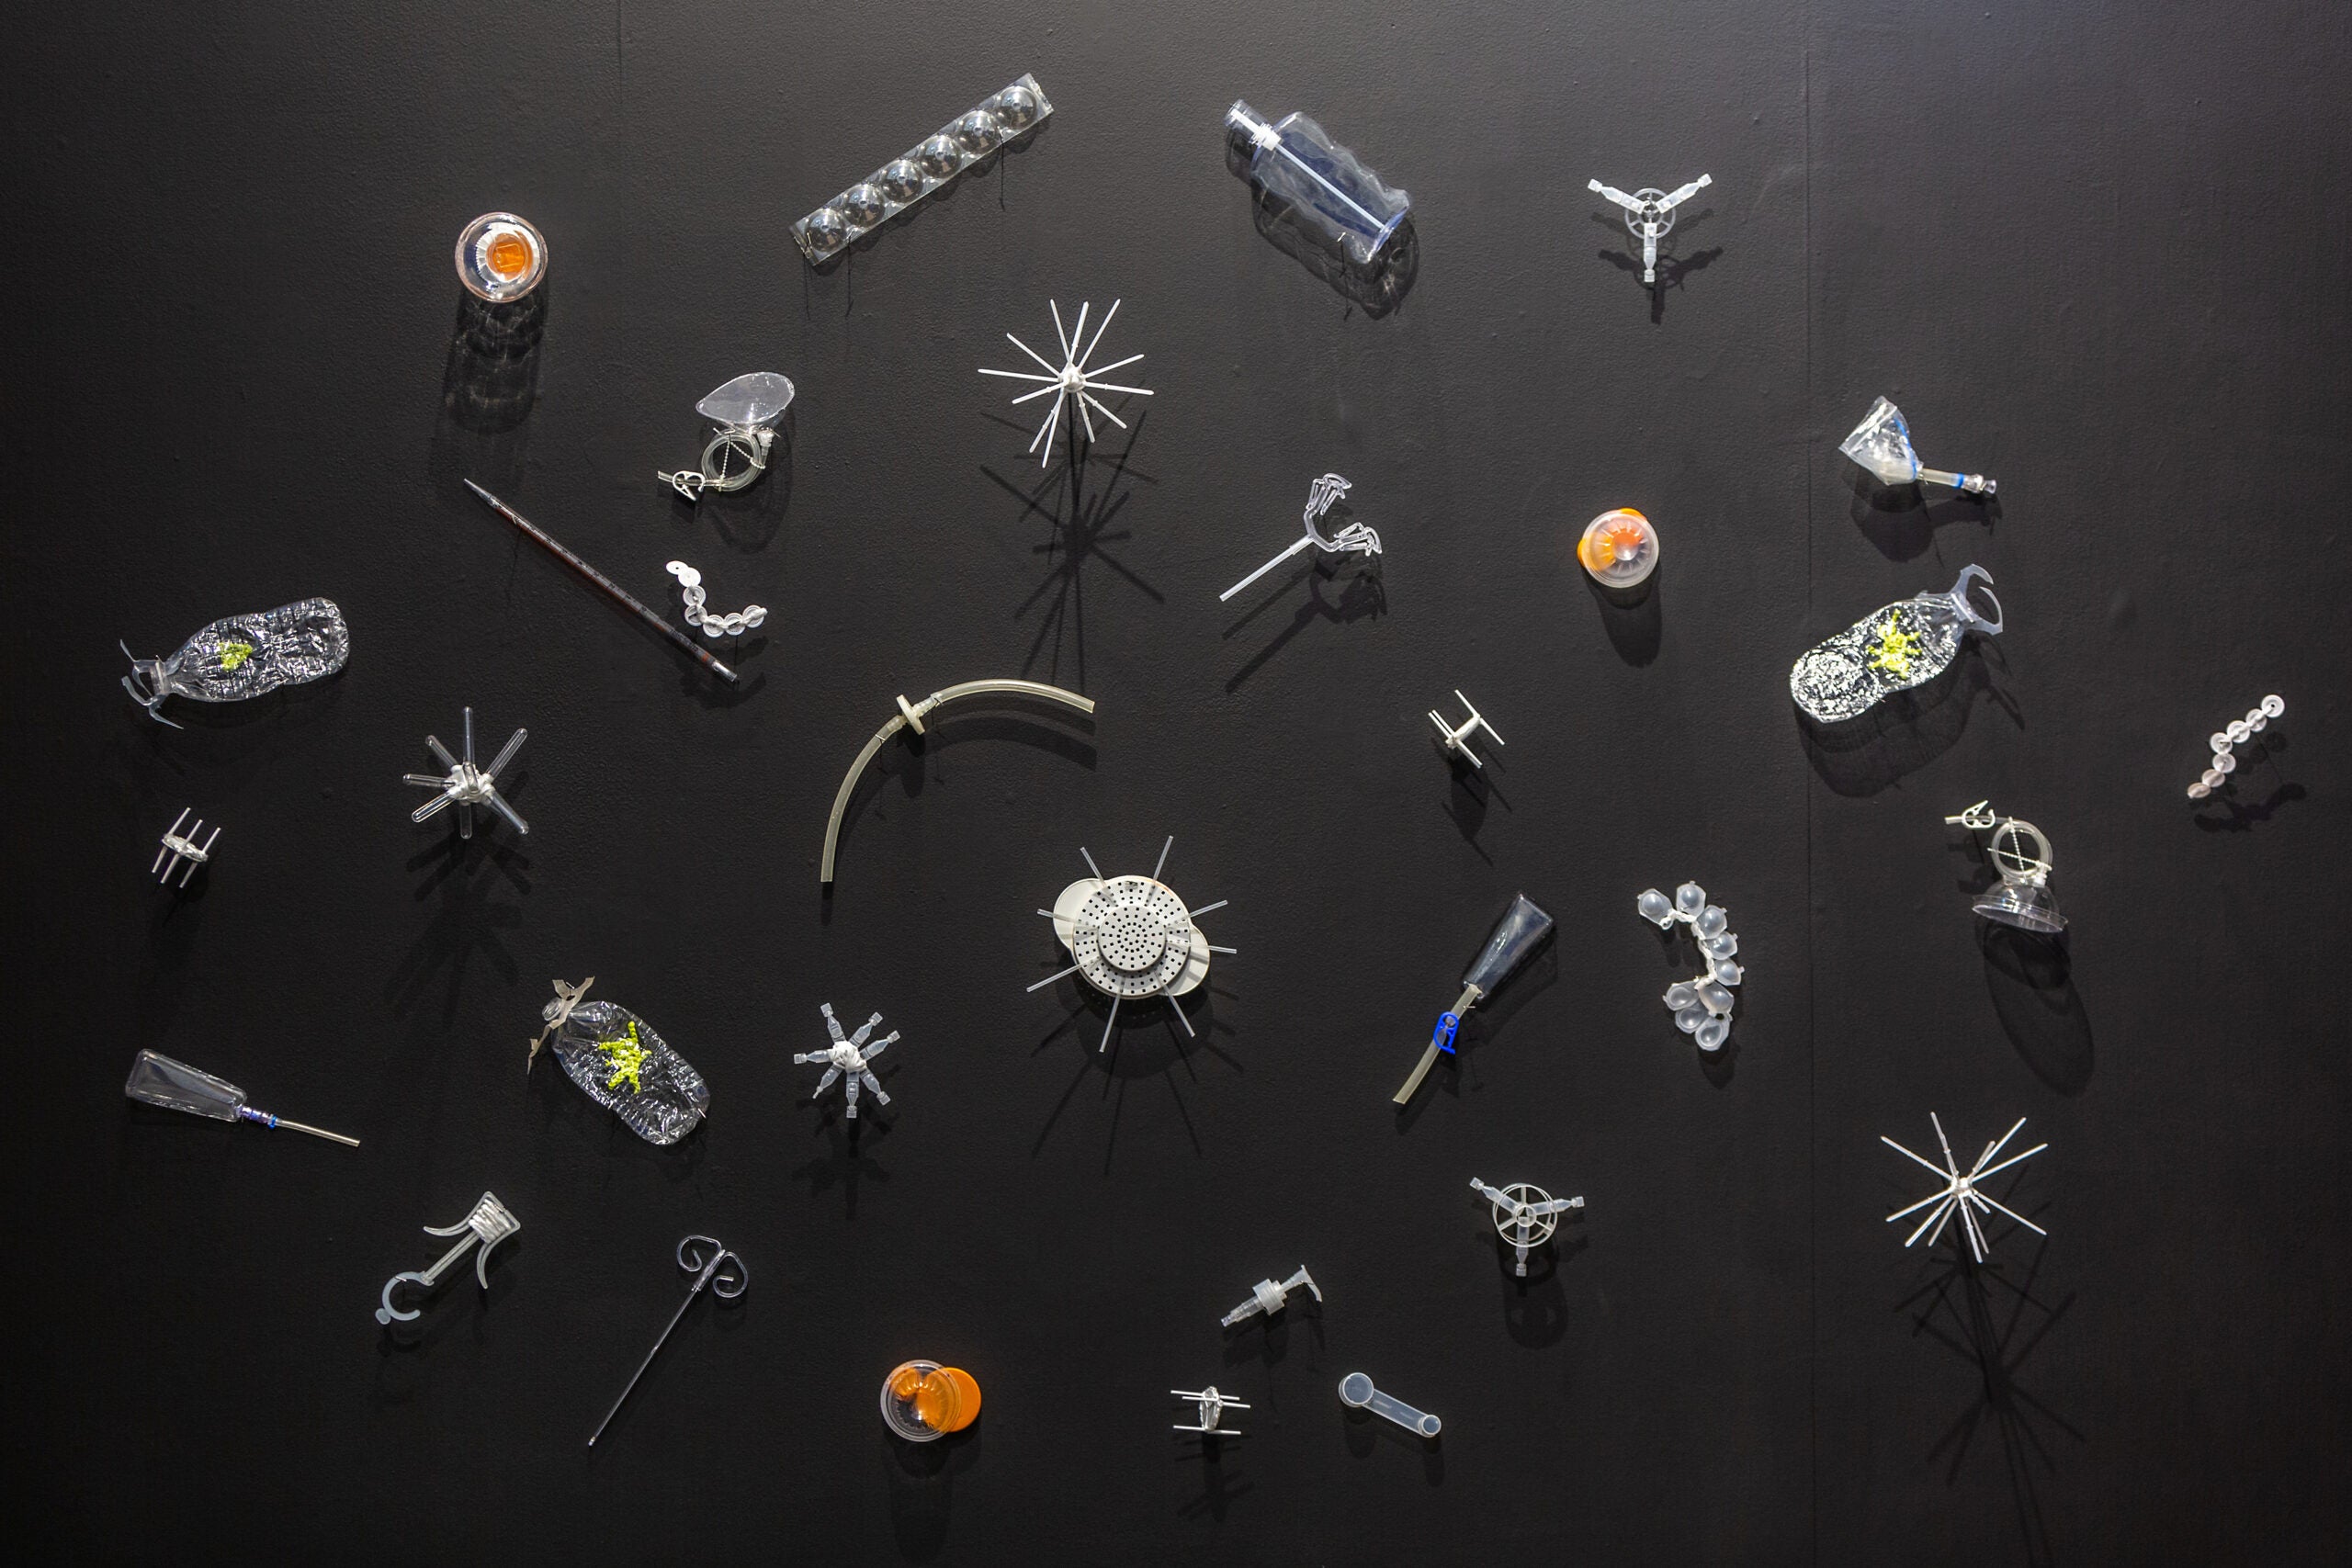 Plankton, 2021 (discarded plastic) by Michelle Lougee